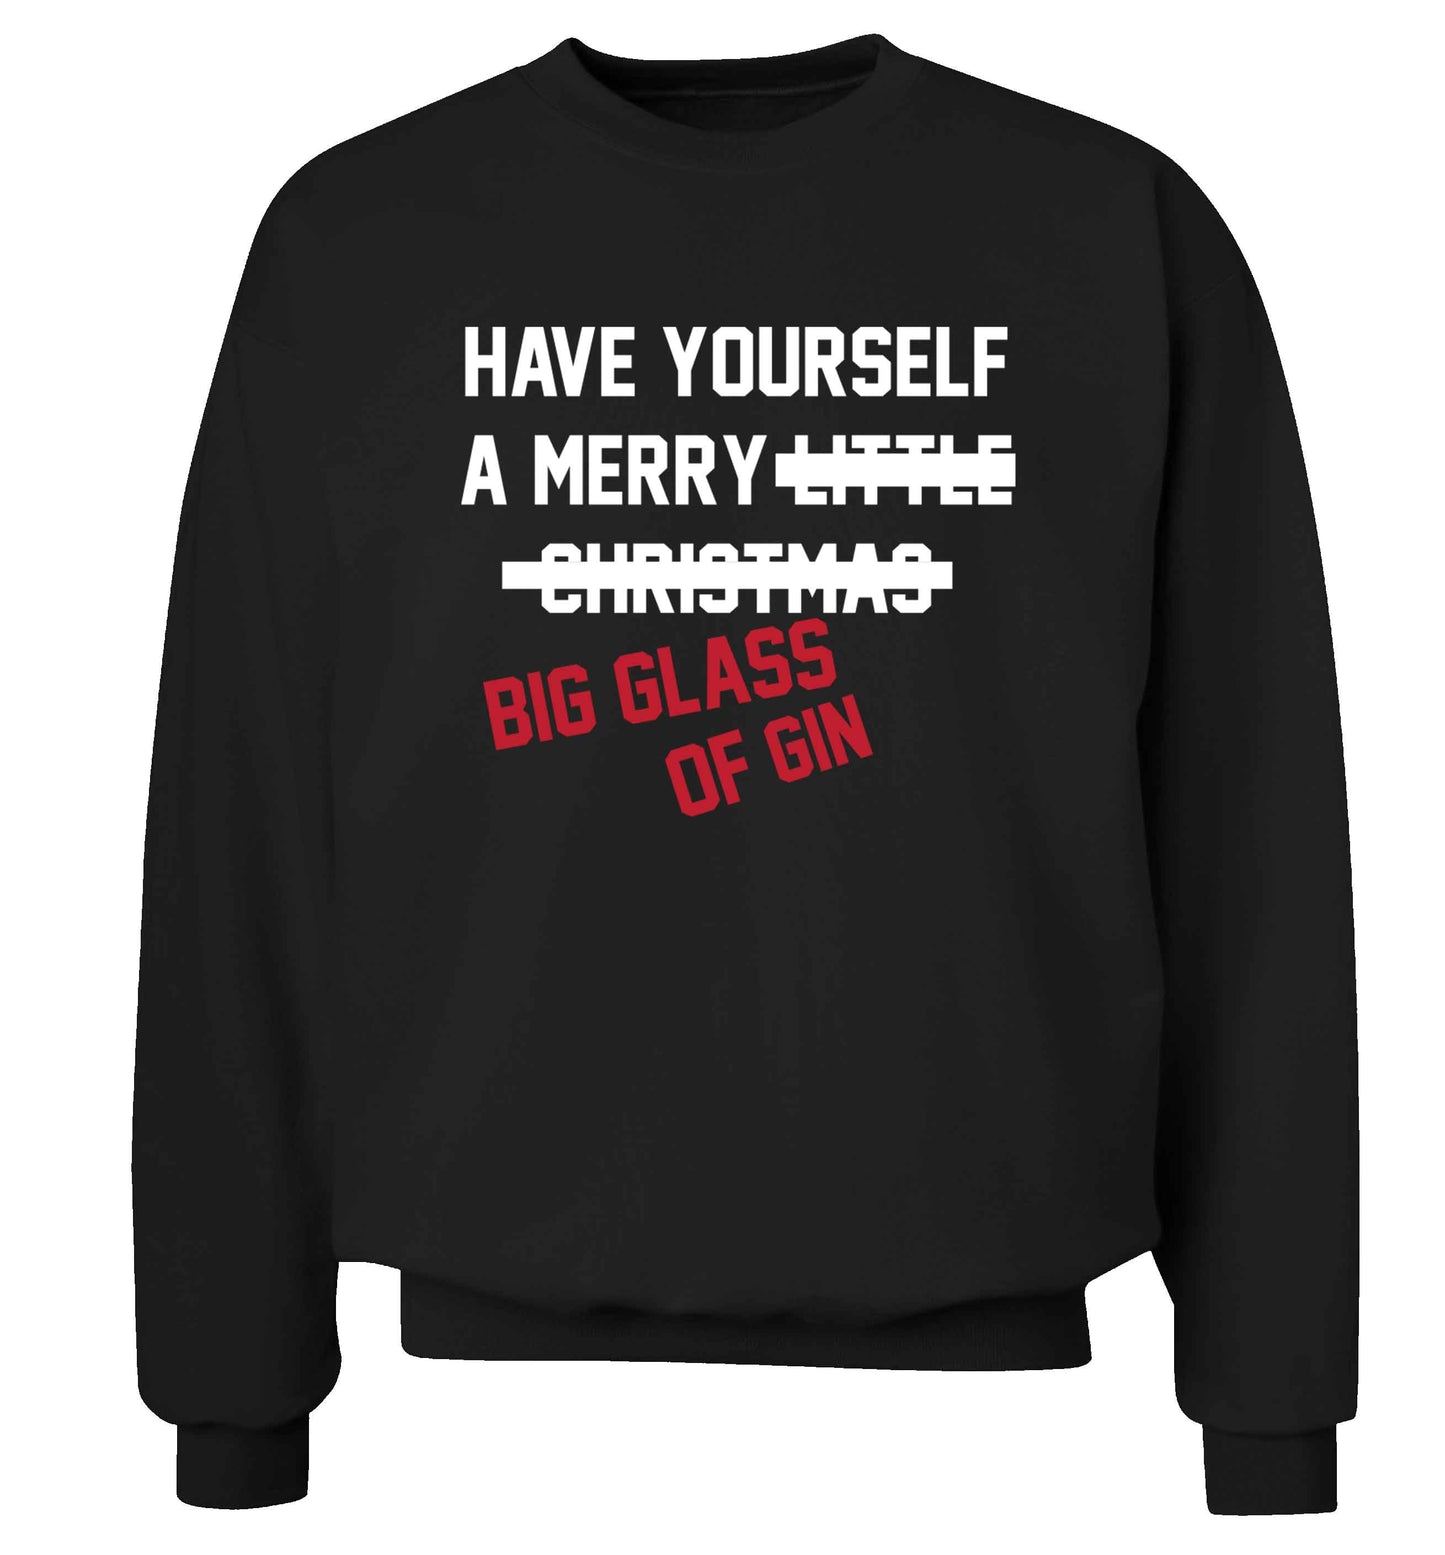 Have yourself a merry big glass of gin Adult's unisex black Sweater 2XL